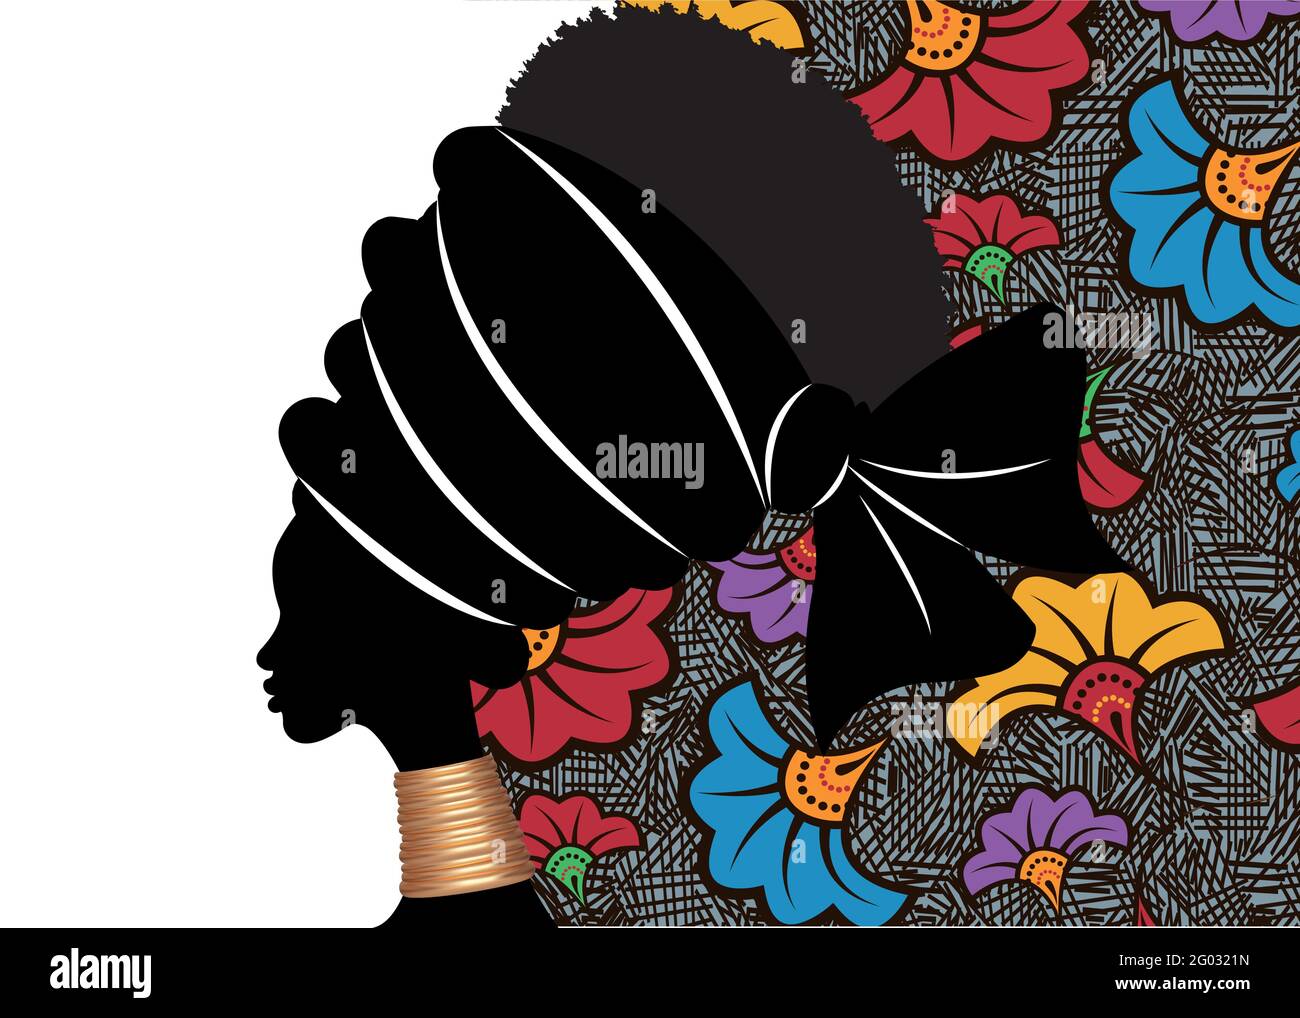 Banner portrait African woman in traditional turban. Tribal motif wedding flowers background, Kente head wrap. African ethnic necklace, black women Stock Vector